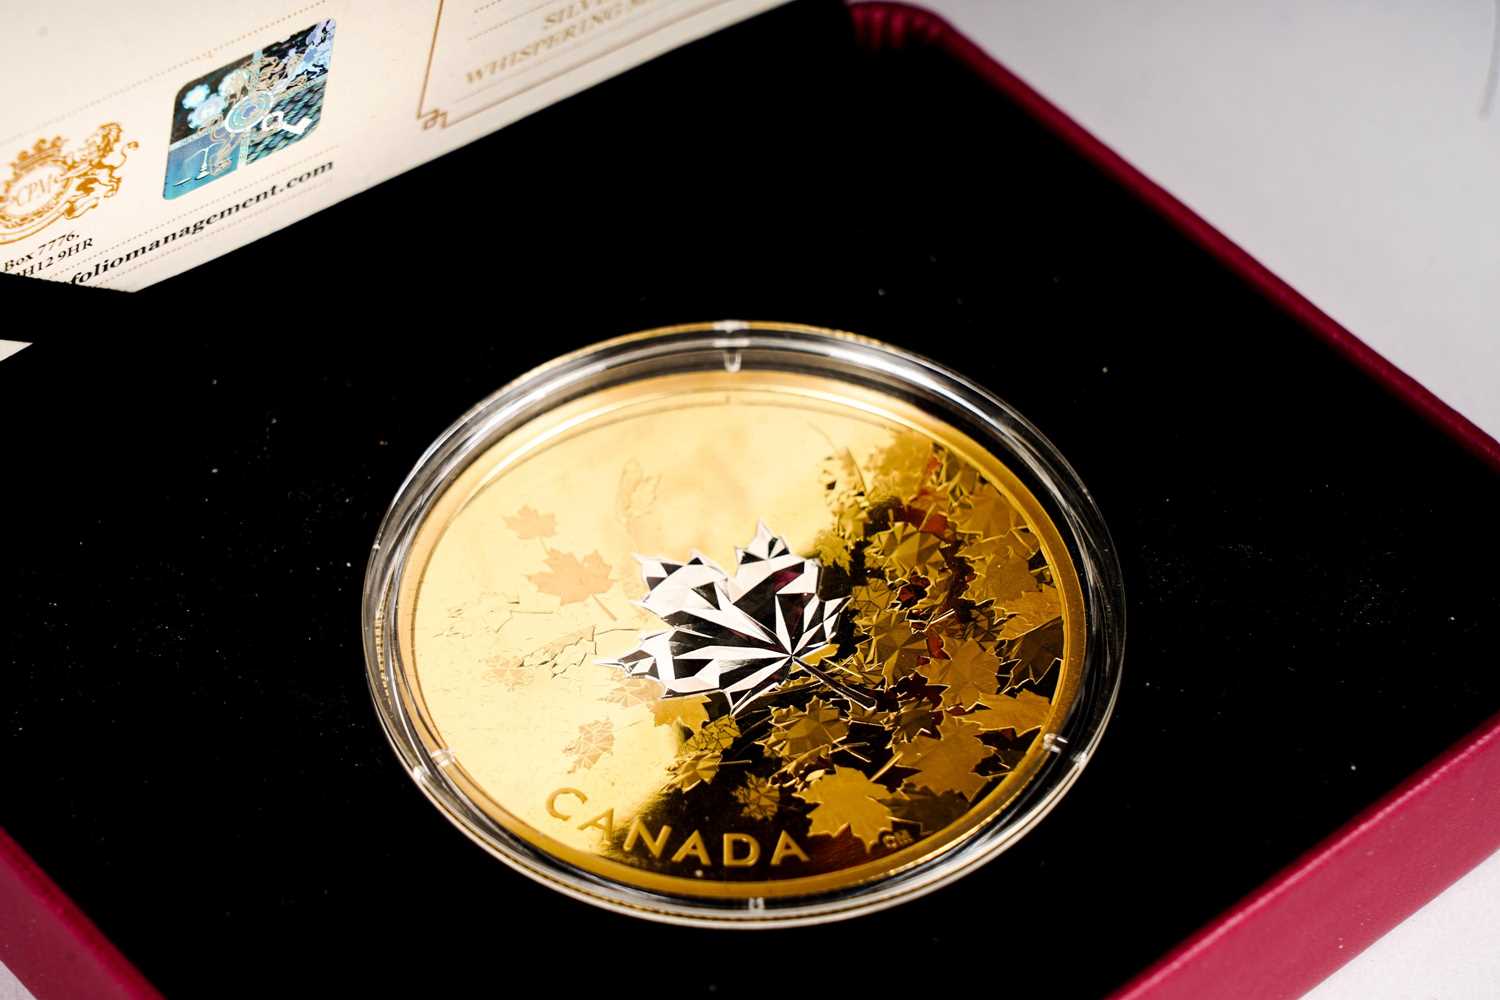 The Royal Canadian Mint Queen Elizabeth II $50 dollar silver proof coin - Image 3 of 3